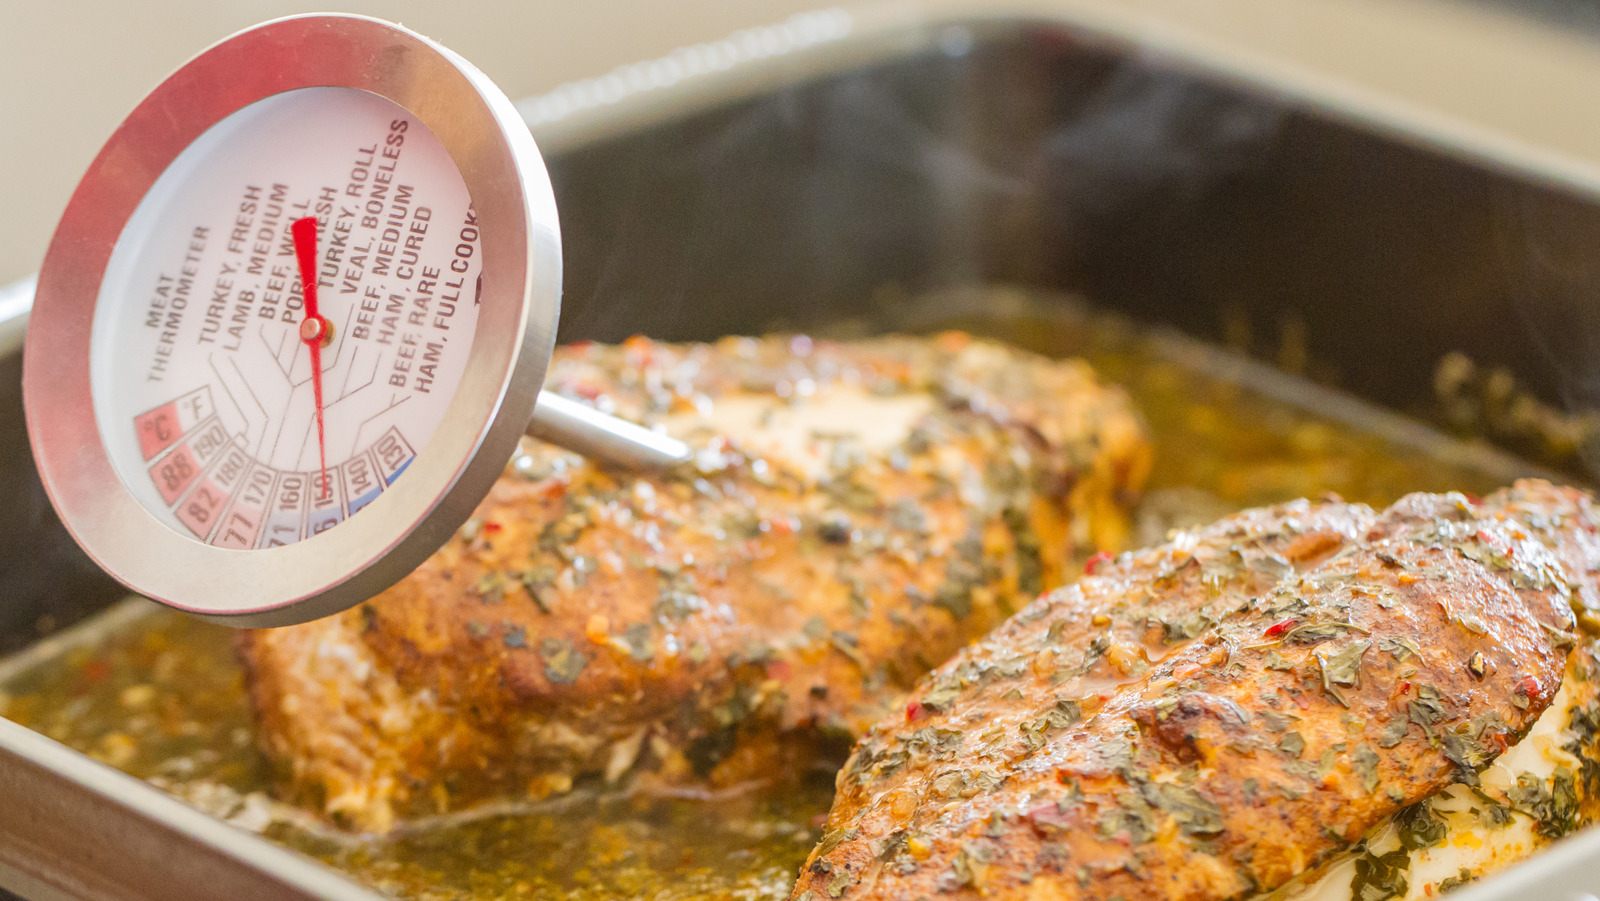 The Practical Reason You Should Own More Than One Meat Thermometer